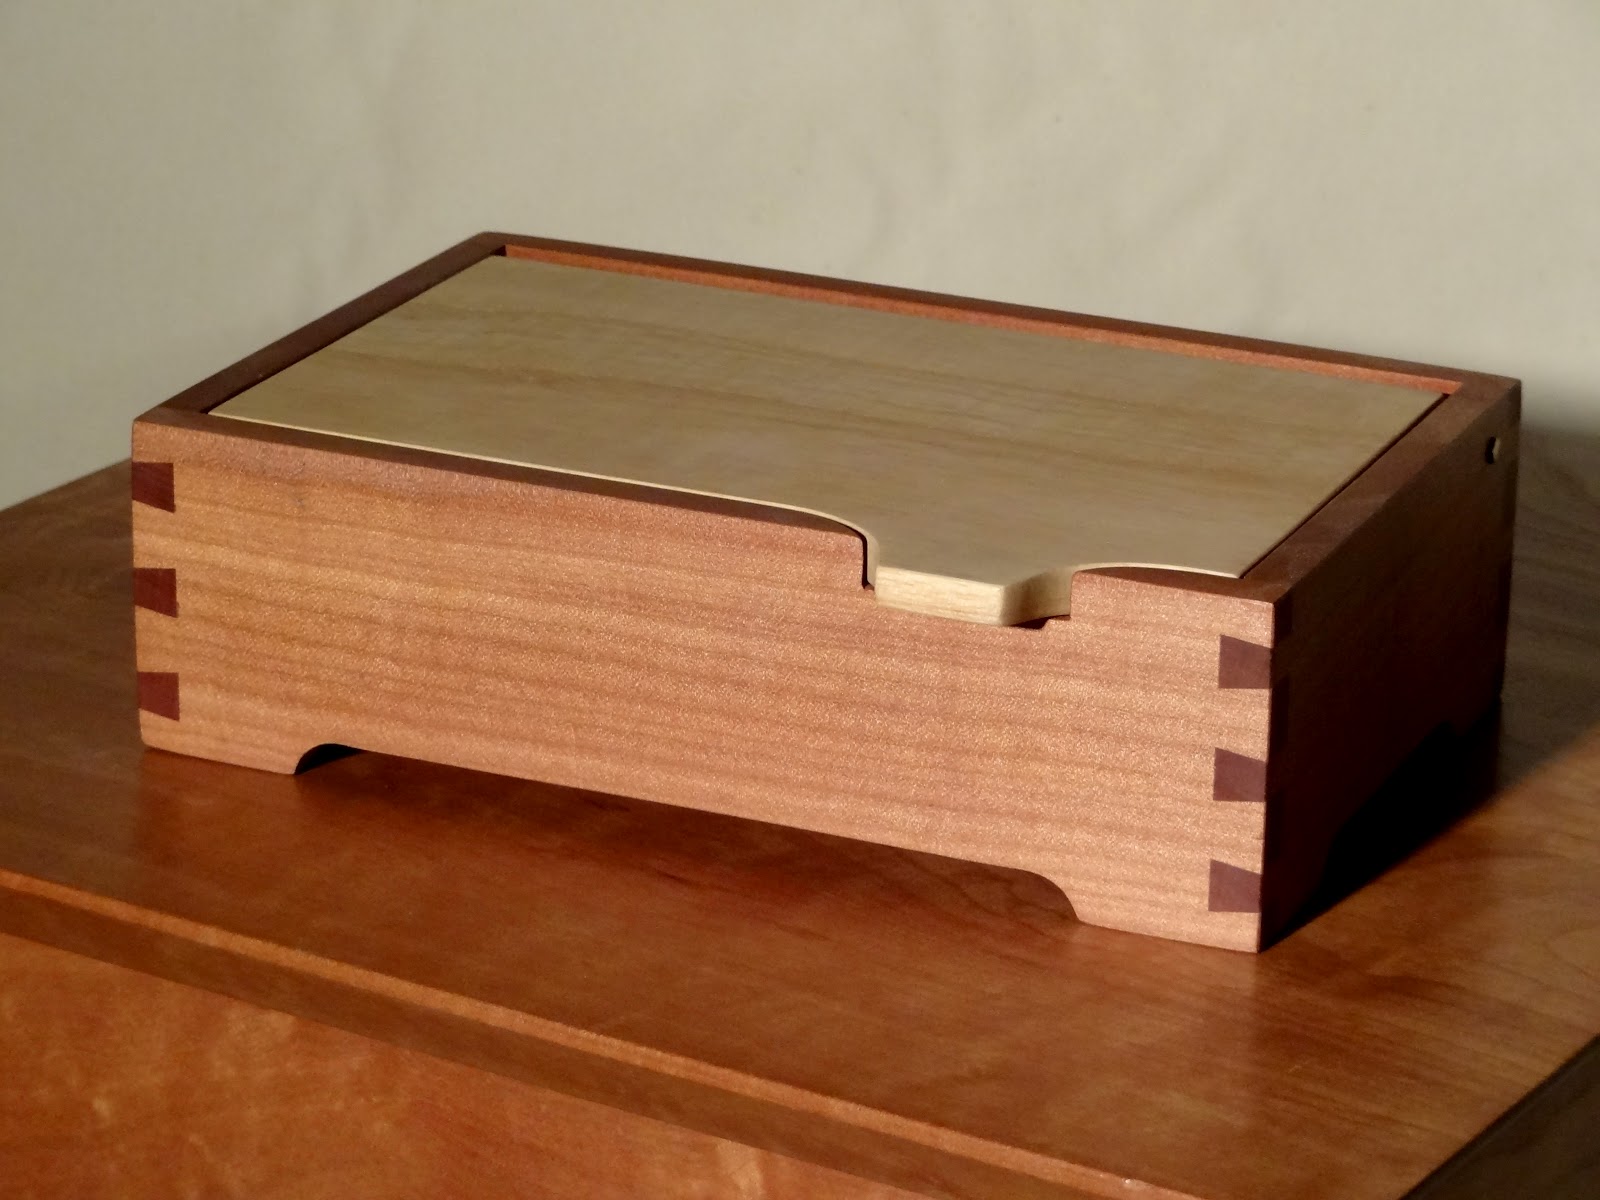 The Dovetail Joint: Completed Projects